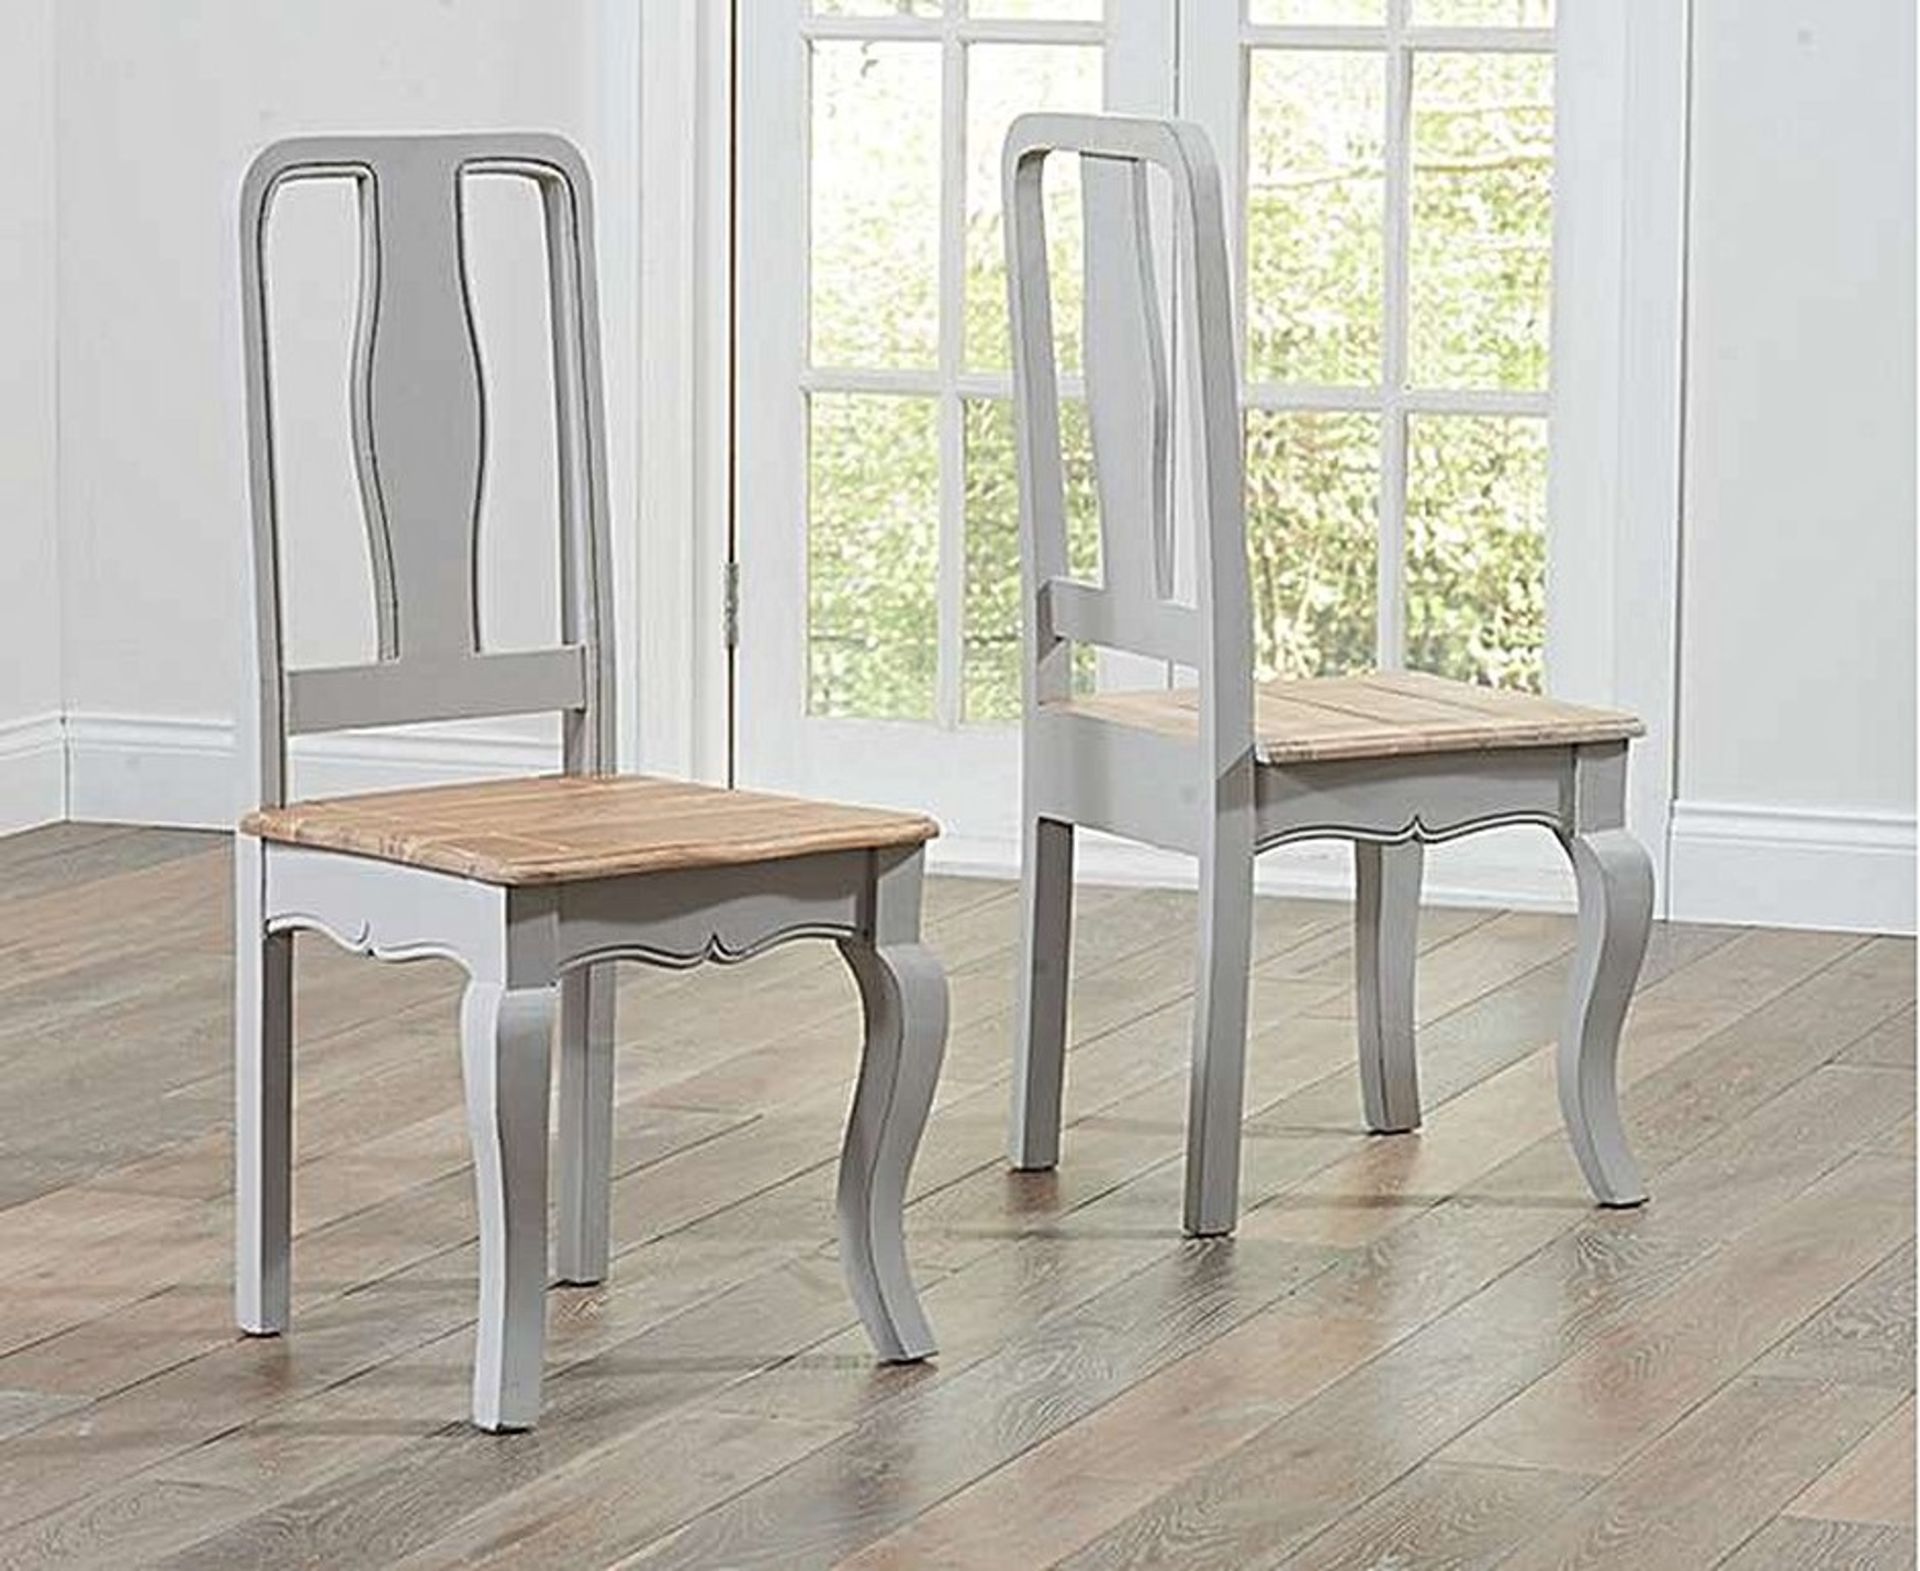 Parisian Grey Shabby Chic Dining Chair has decidedly feminine curves. Exquisitely crafted in accacia